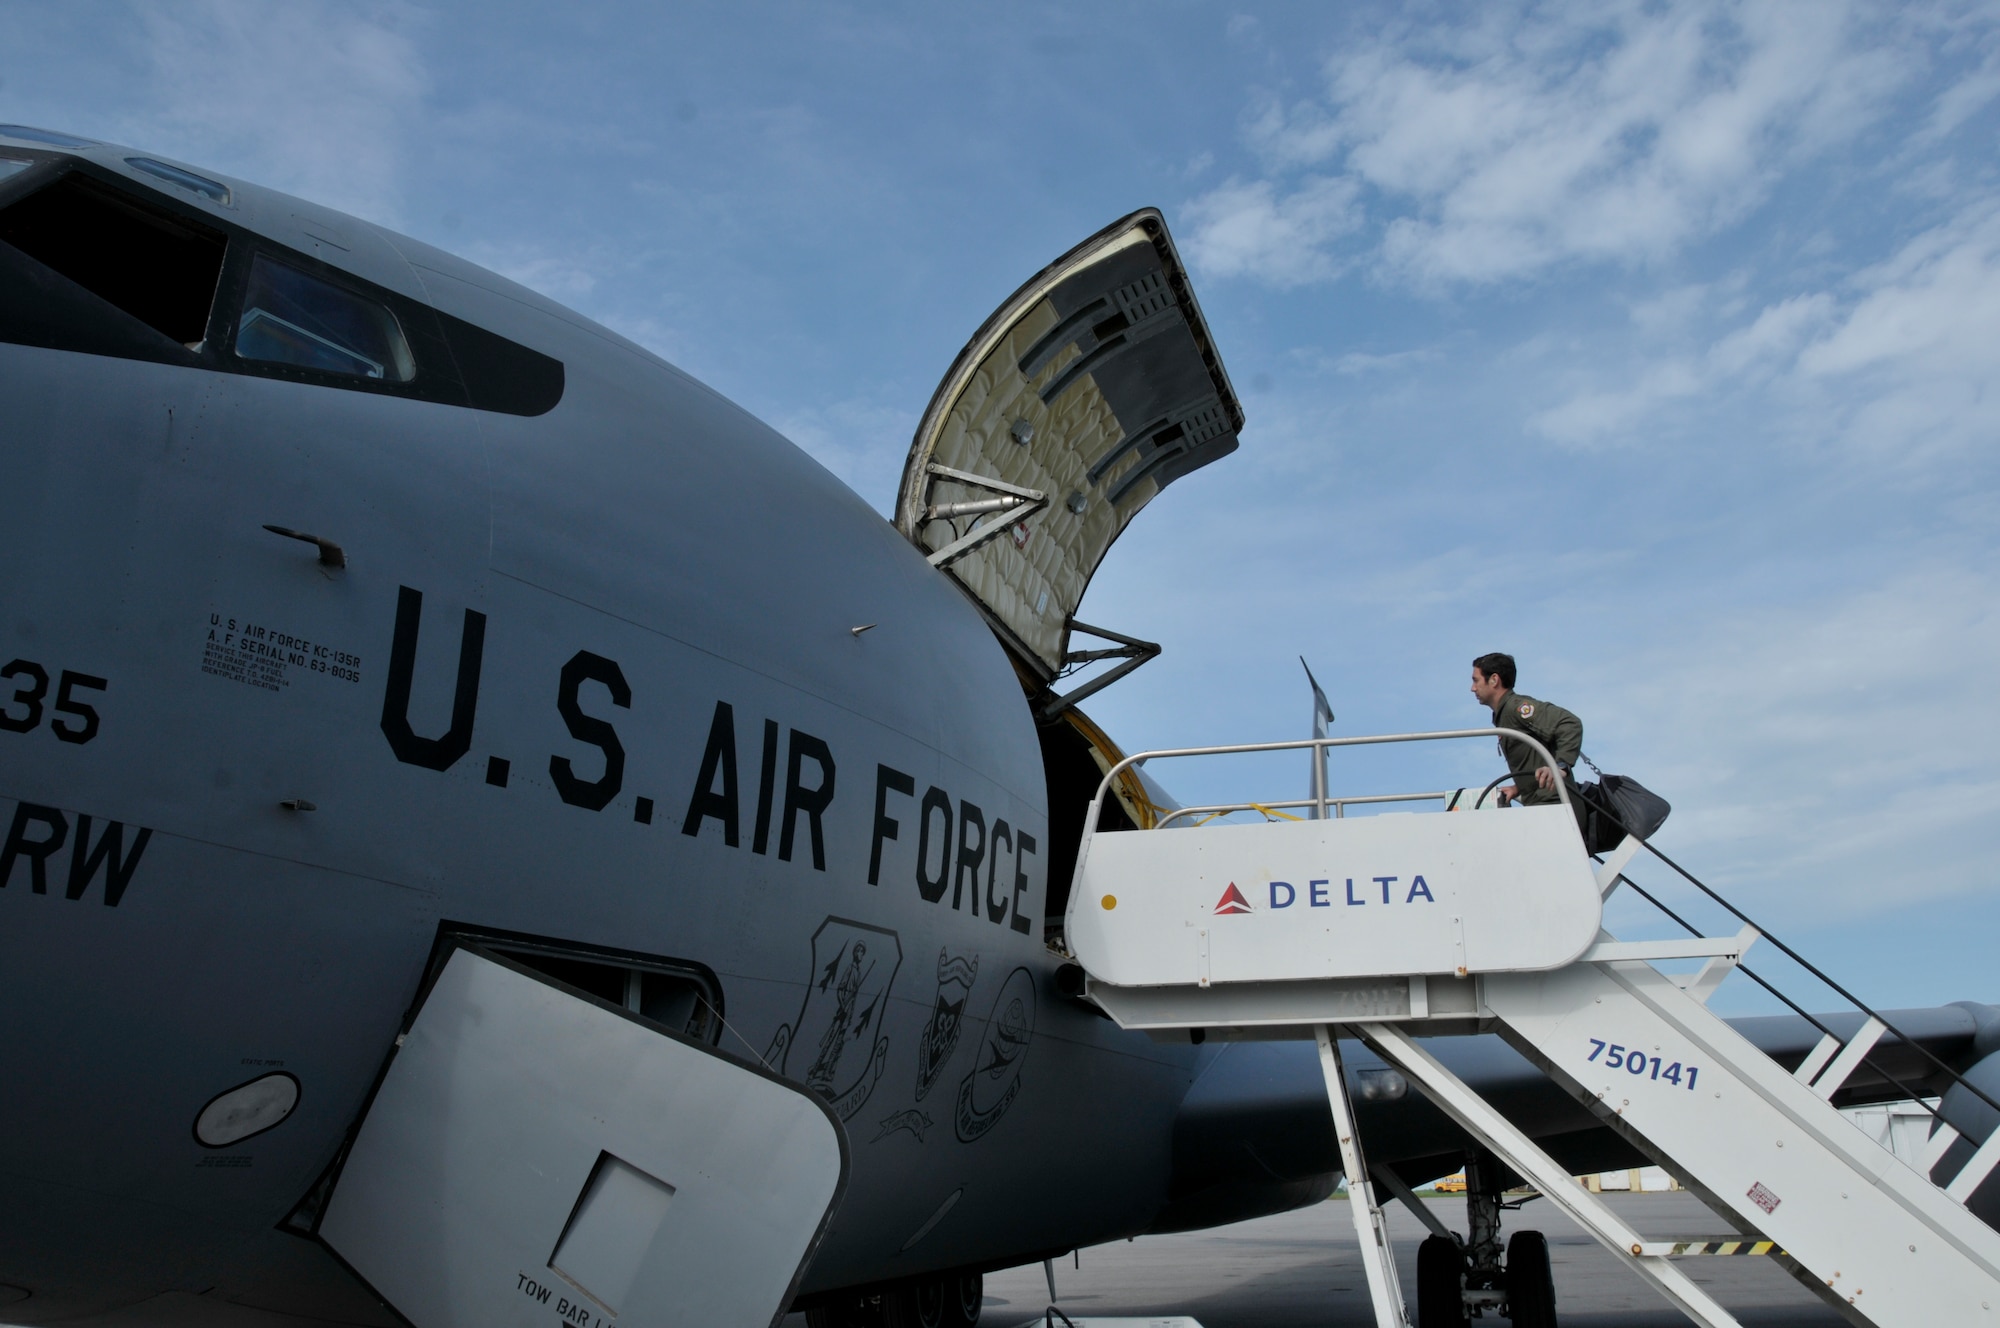 Members of the 187th Fighter Wing board a KC-135 Stratotanker for a deployment to Nellis AFB, Nev., Apr 11, 2015. The 187FW will support and train pilots in Air-to-Air combat tactics at the U. S. Air Force Weapons School, Nellis AFB. (U.S. Air National Guard photo by Tech. Sgt. Matthew Garrett / Released)